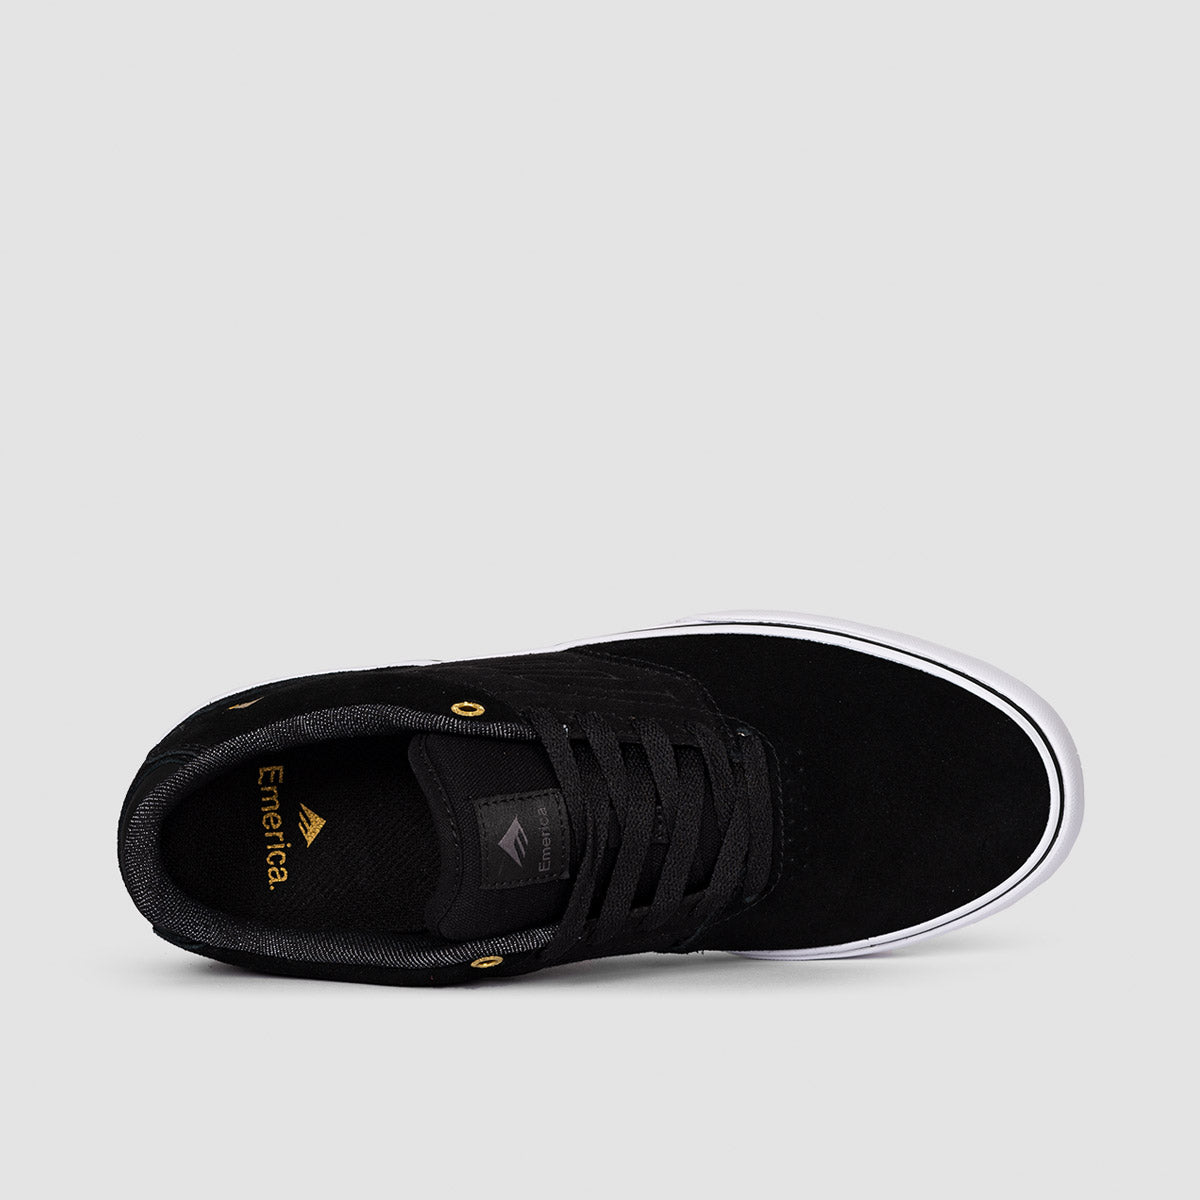 Emerica The Low Vulc Shoes - Black/Gold/White